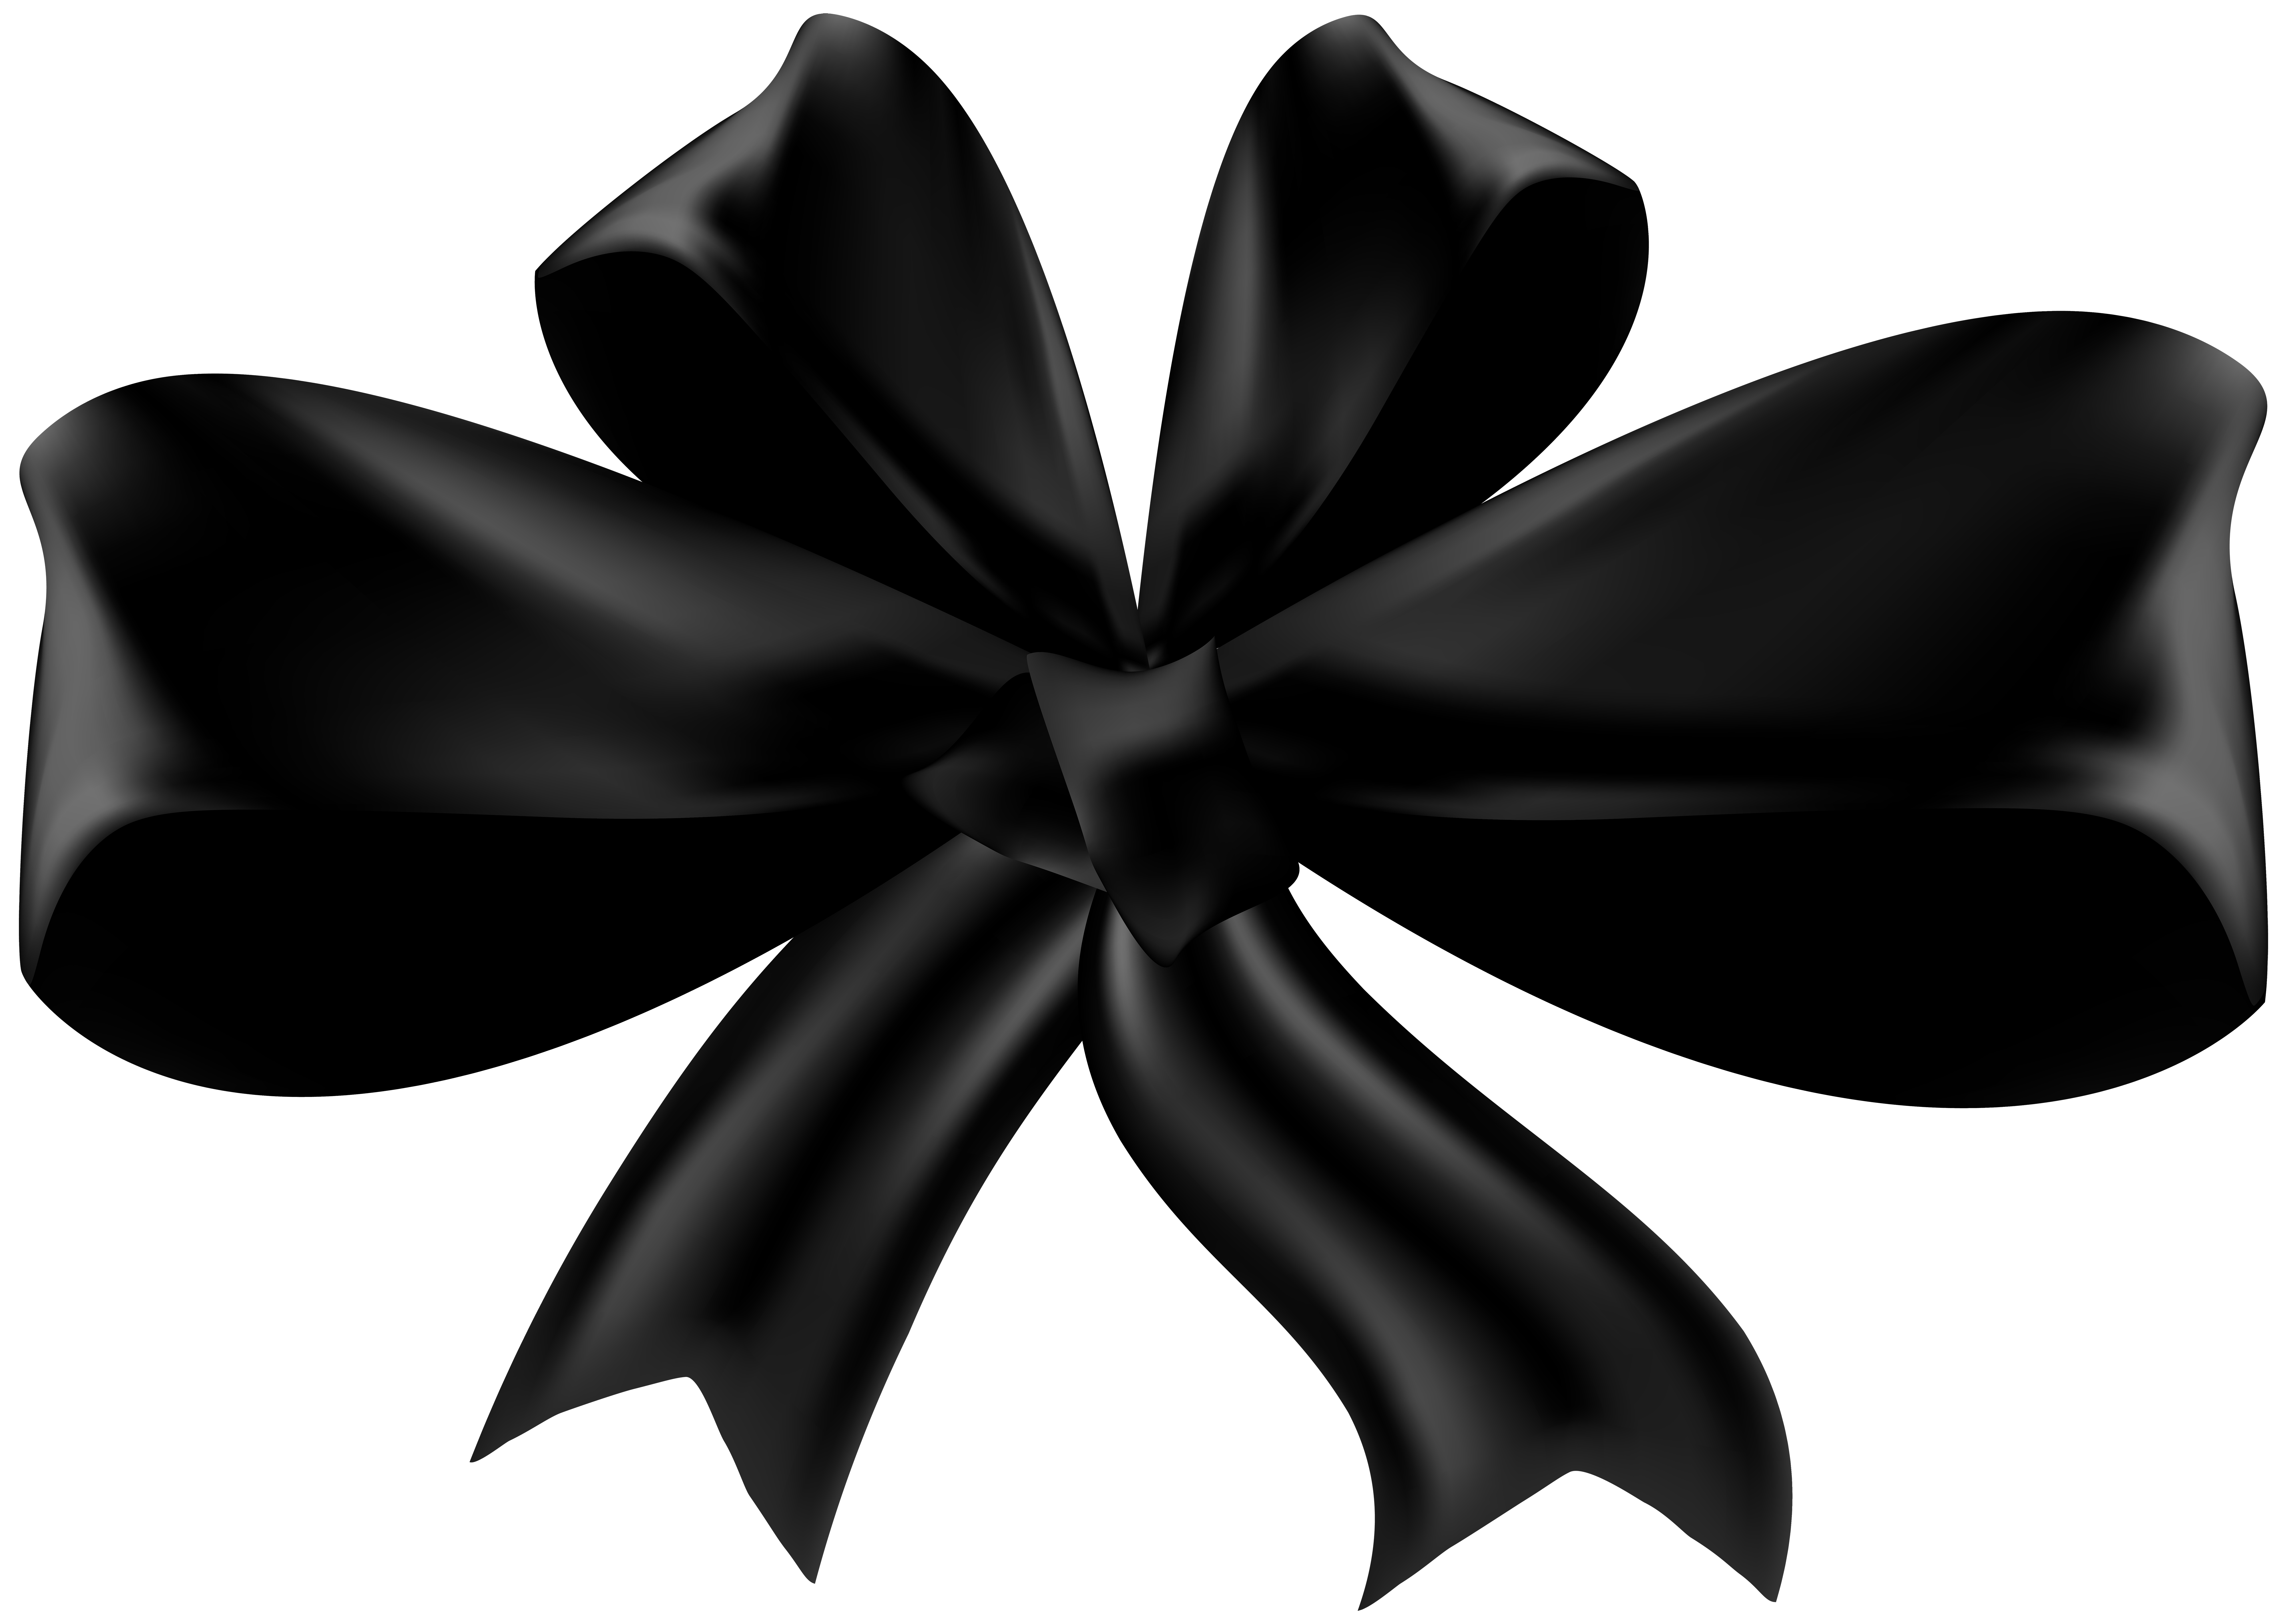 Black Bow PNGs for Free Download